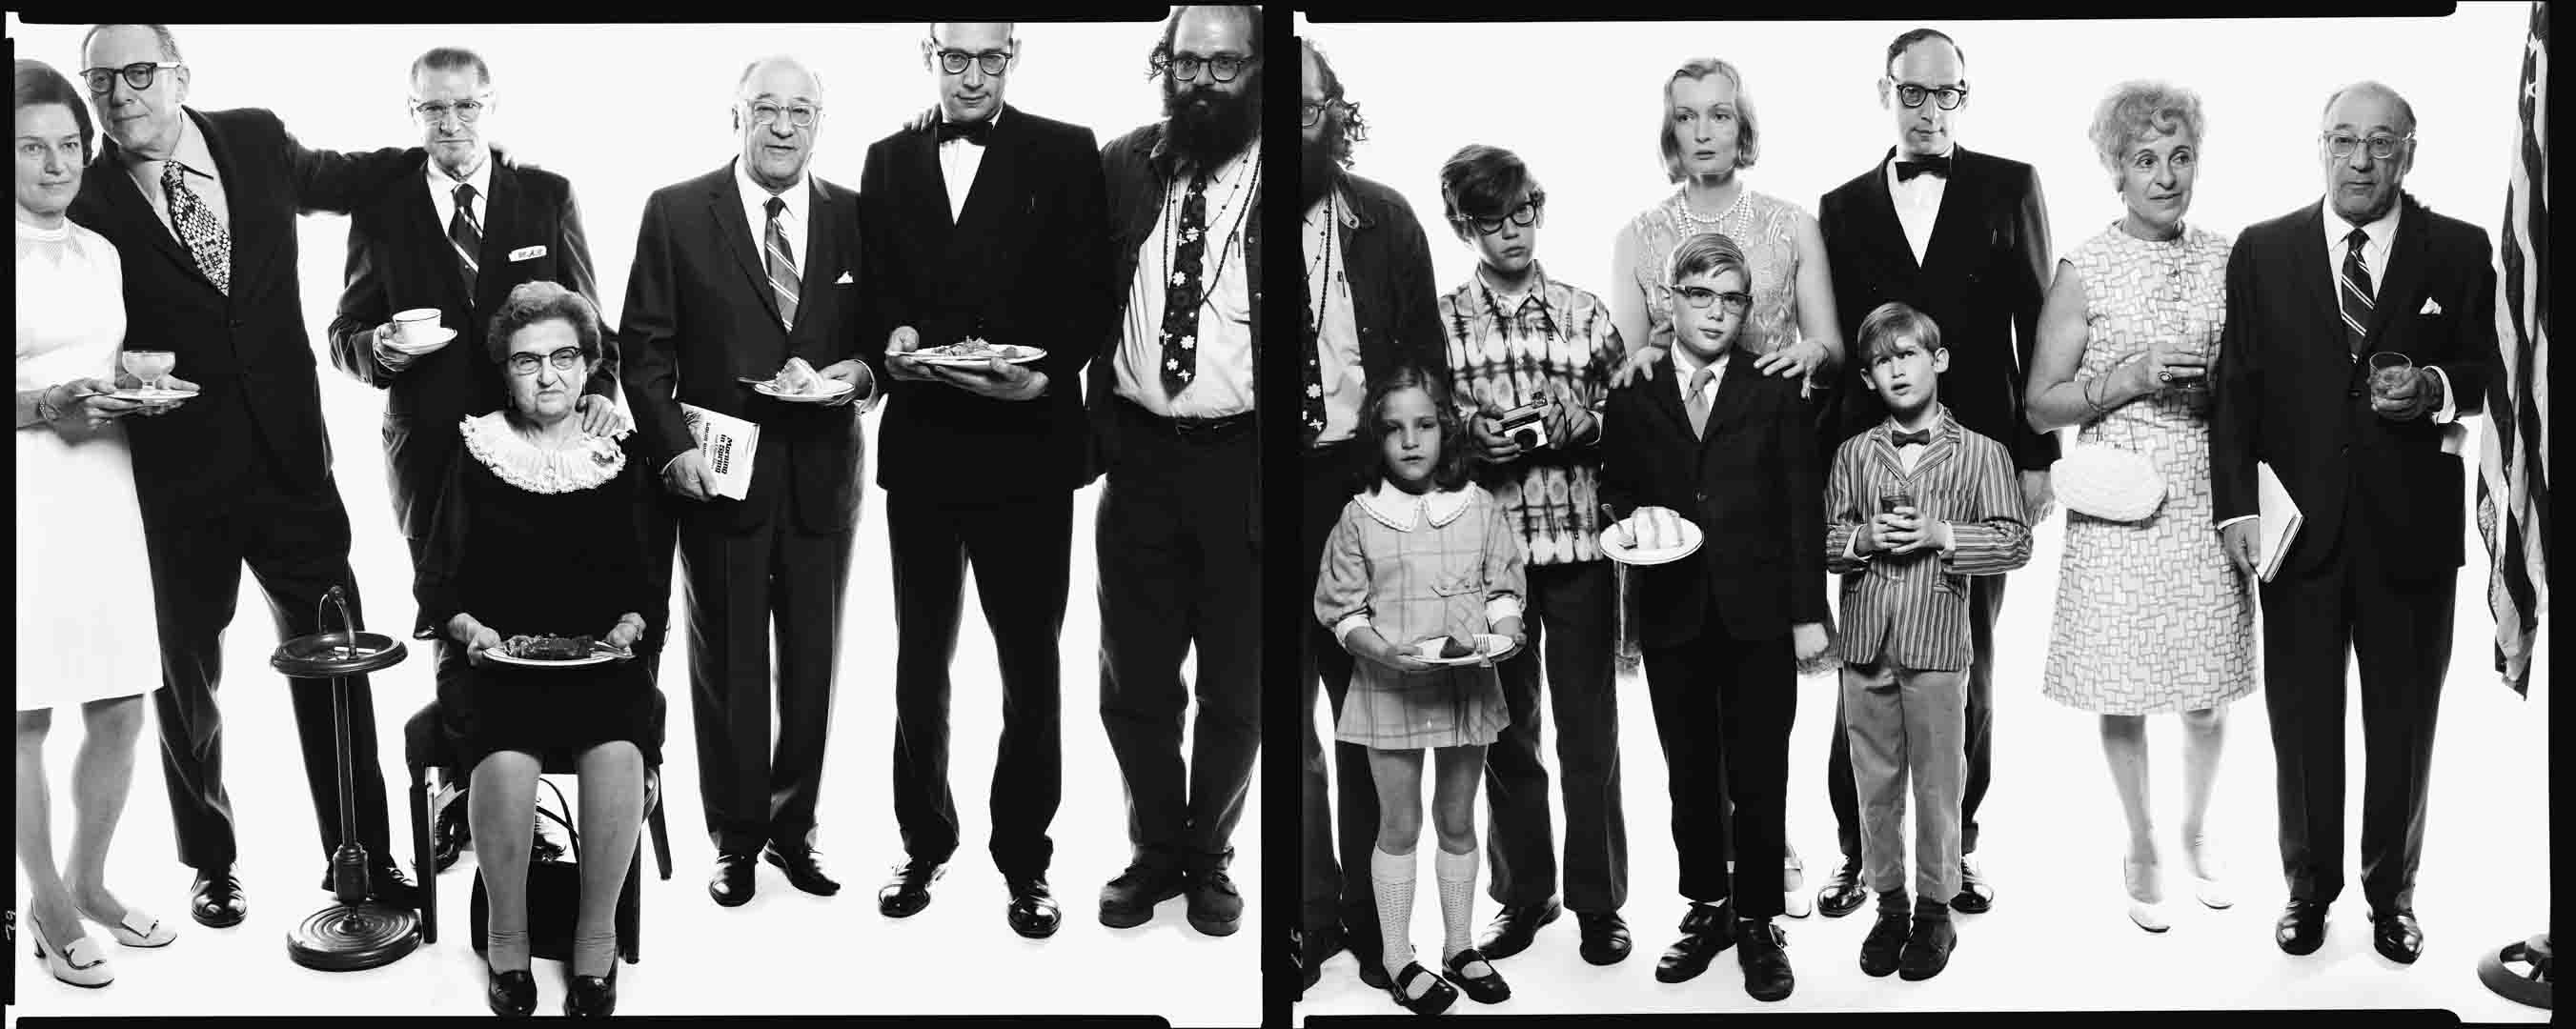 Allen Ginsberg Family, New Jersey, May 3, 1970